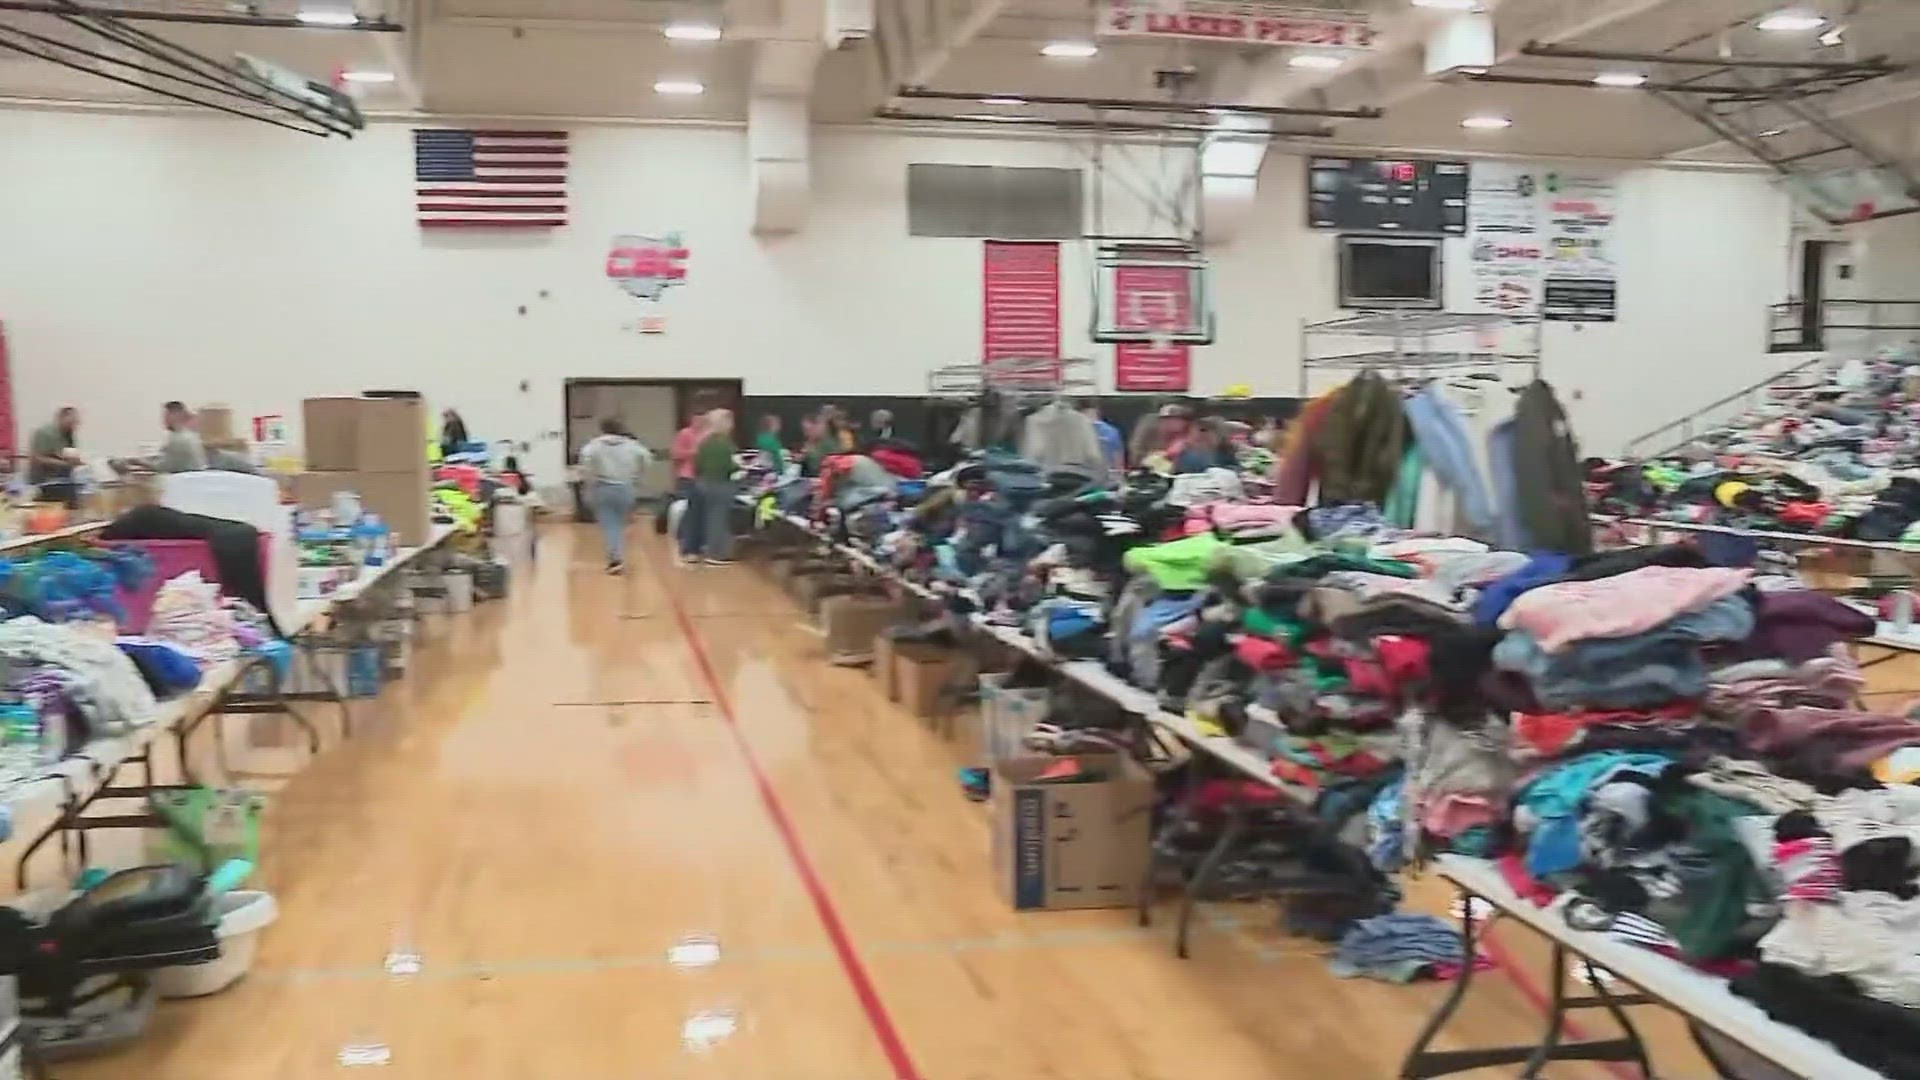 In just hours, school staff and volunteers filled the gymnasium.